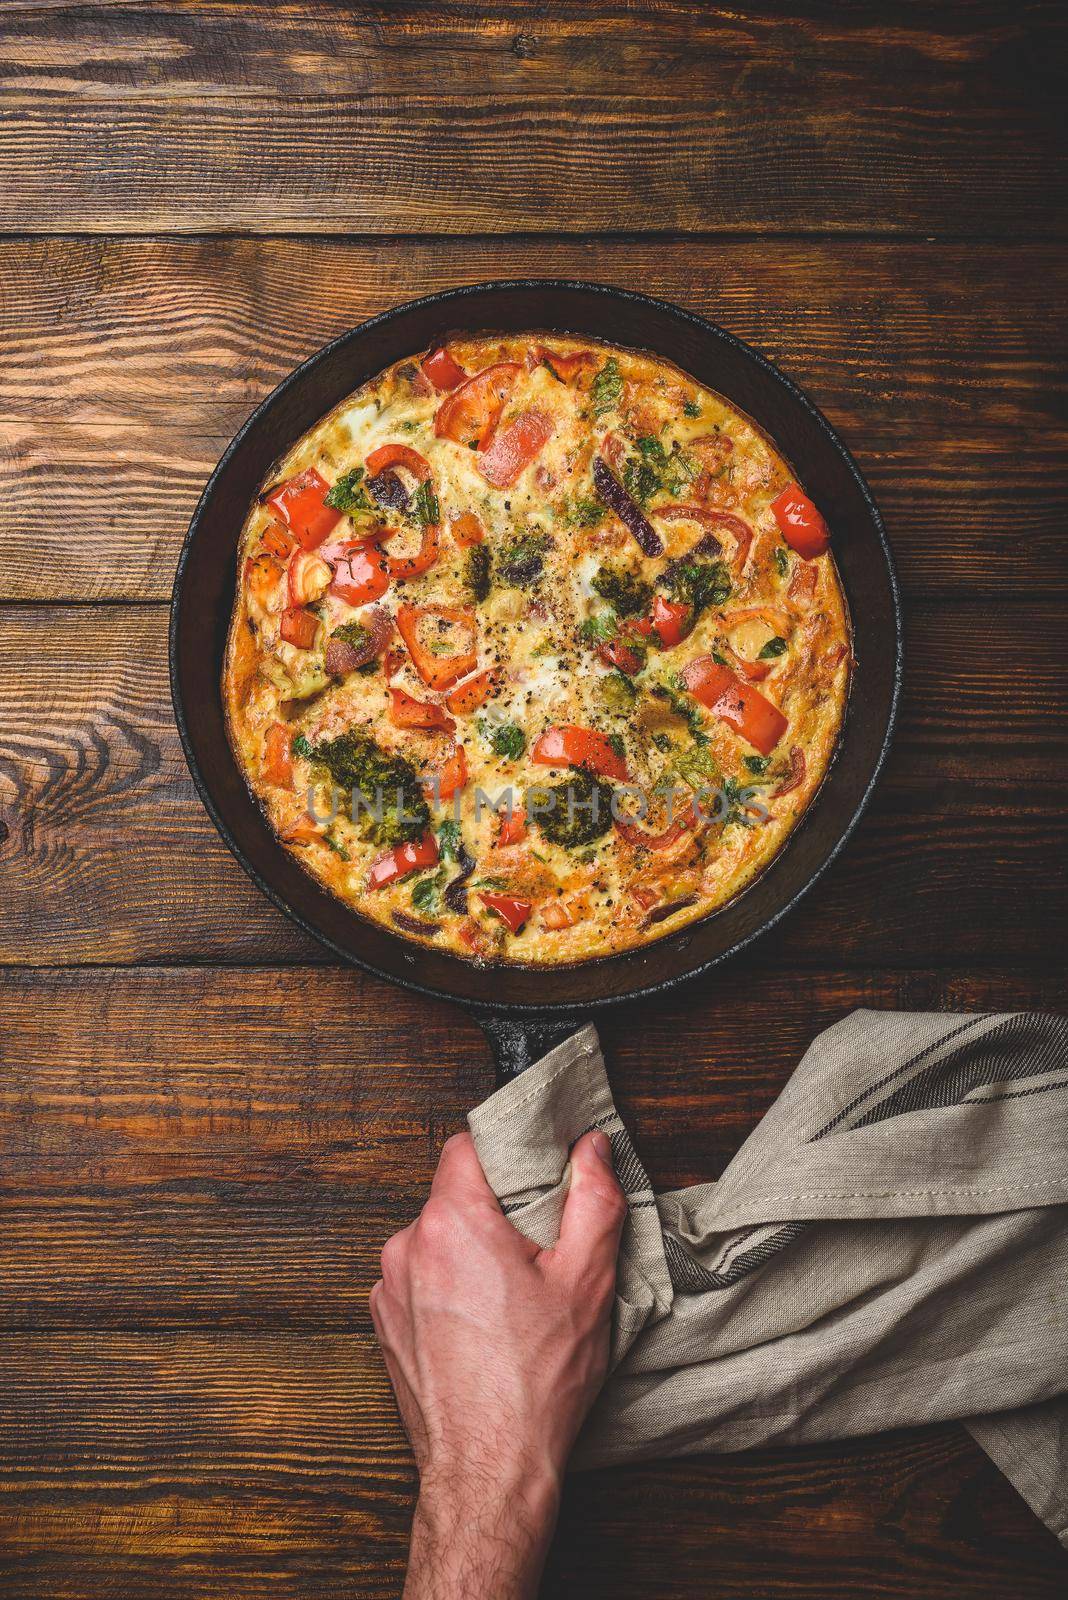 Vegetable frittata with broccoli, red bell pepper and herbs. Hand holds cast iron skillet